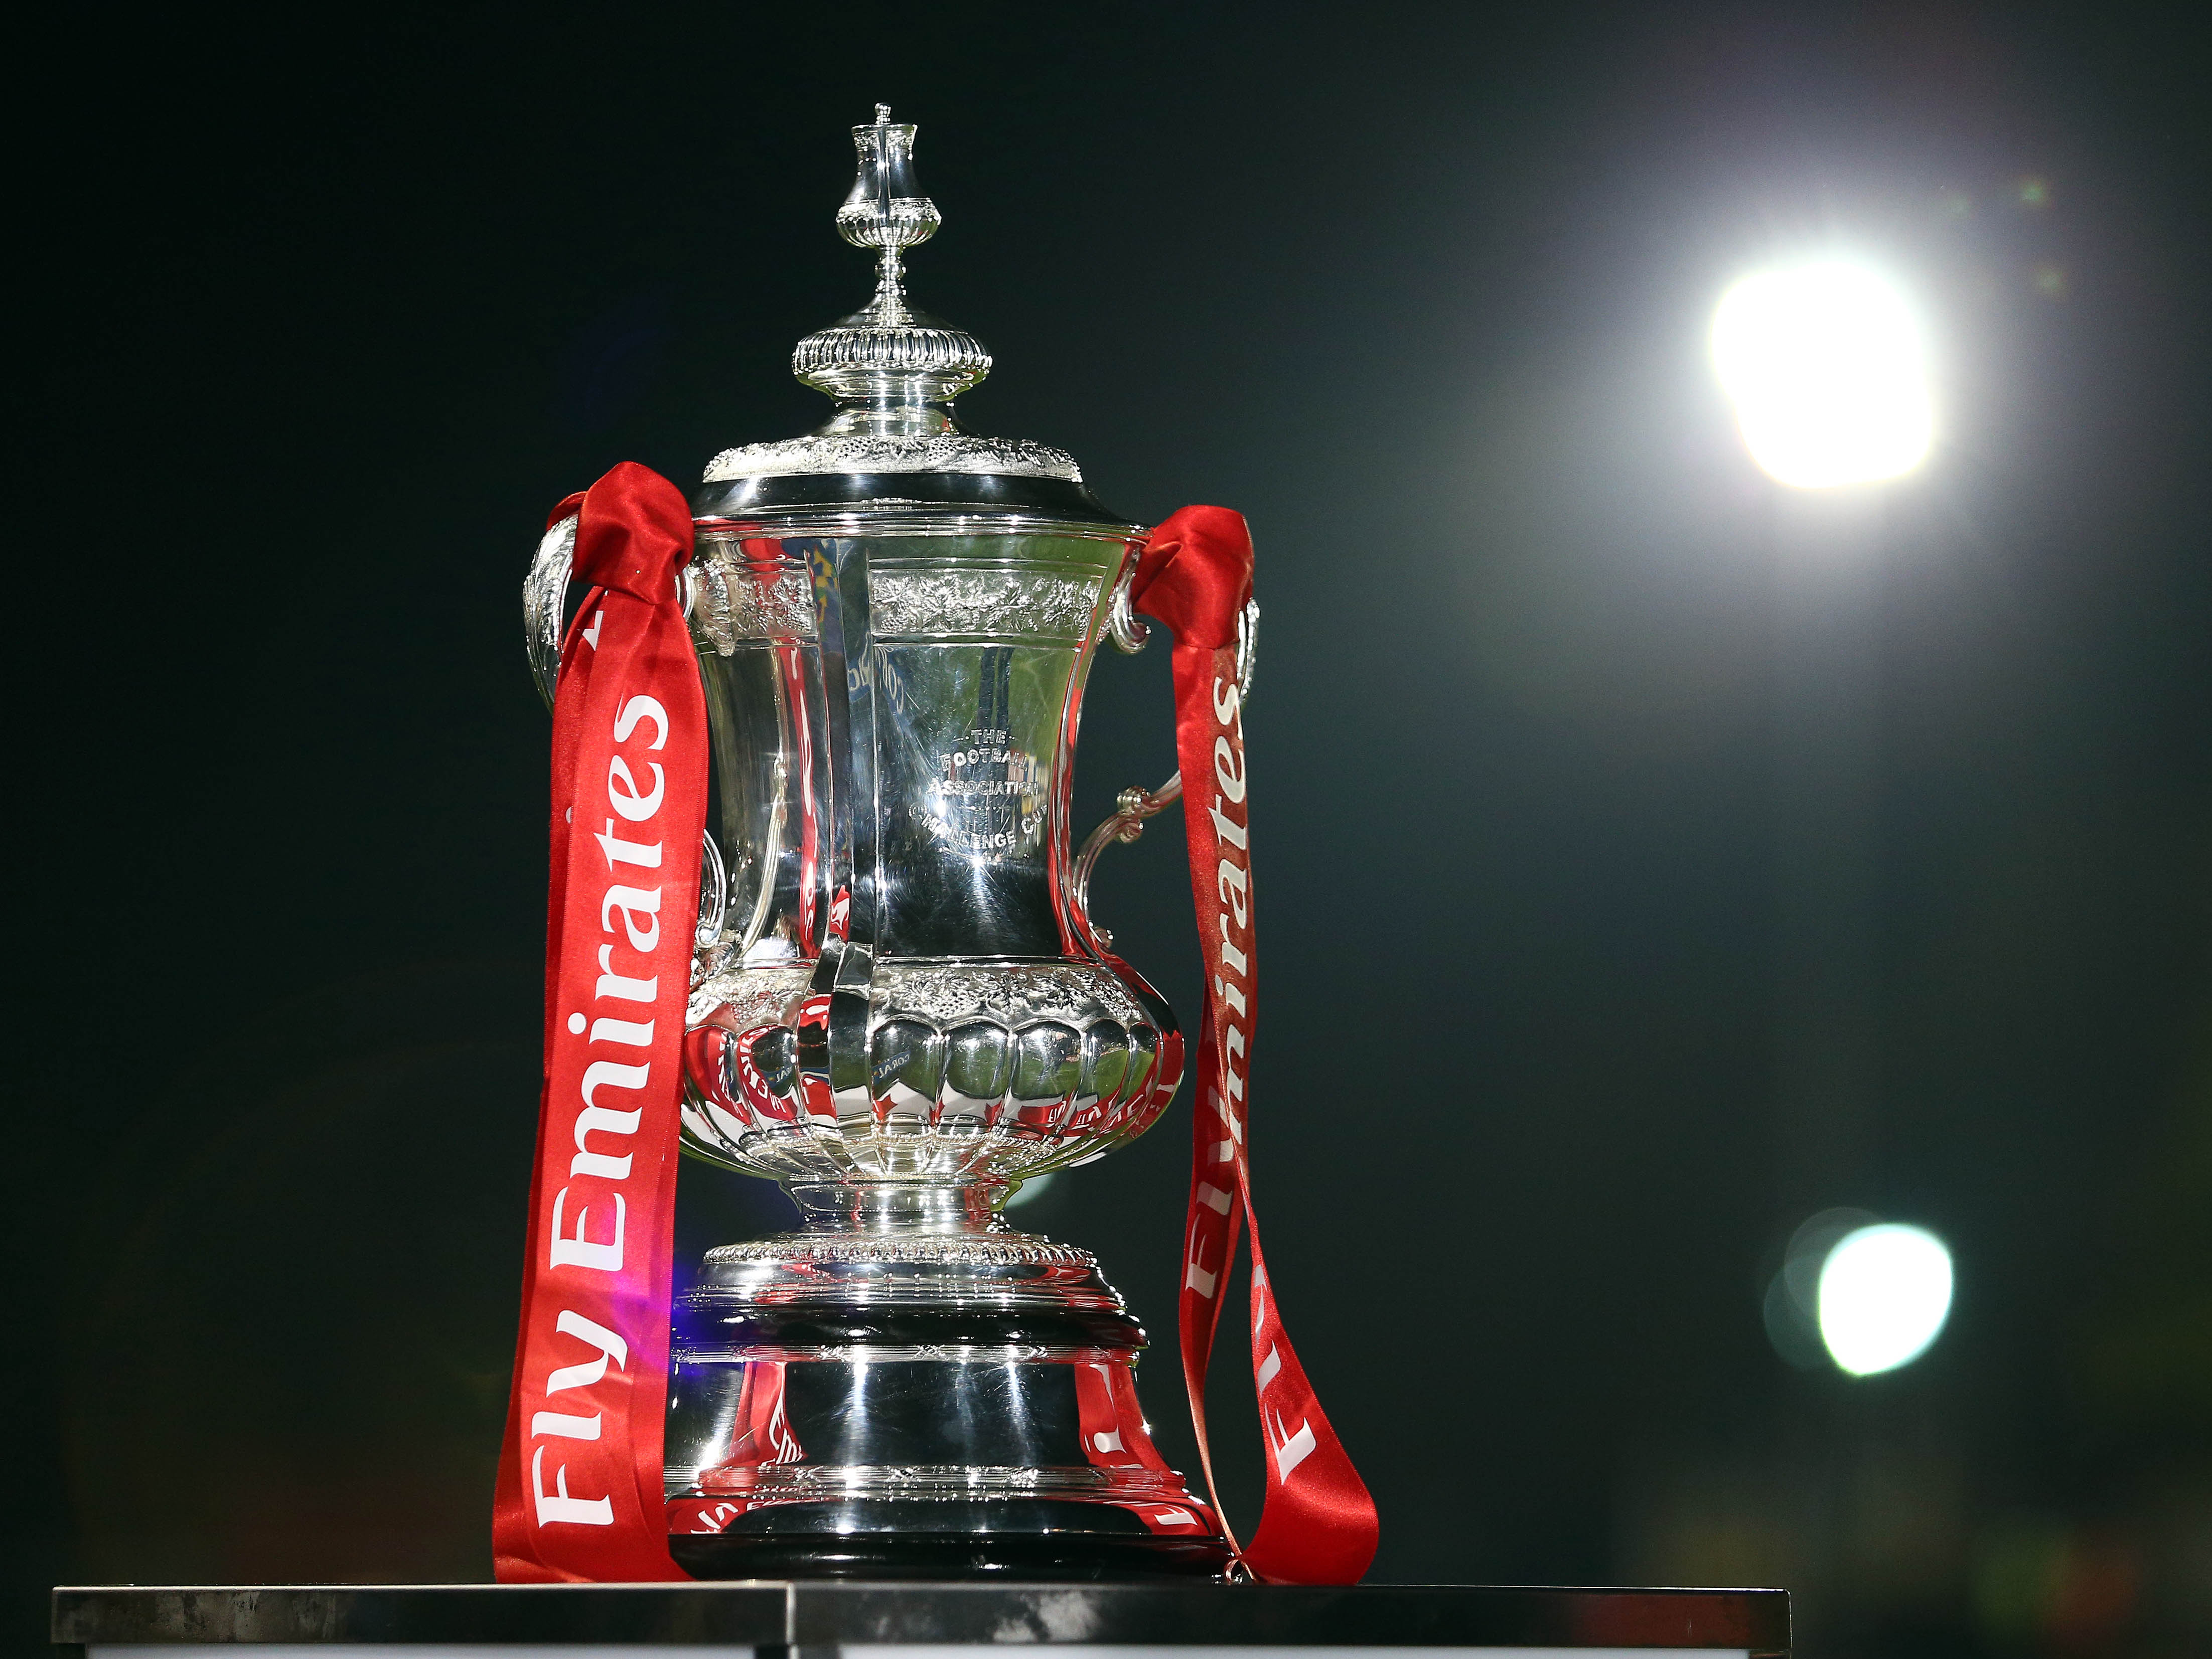 An image of the FA cup trophy